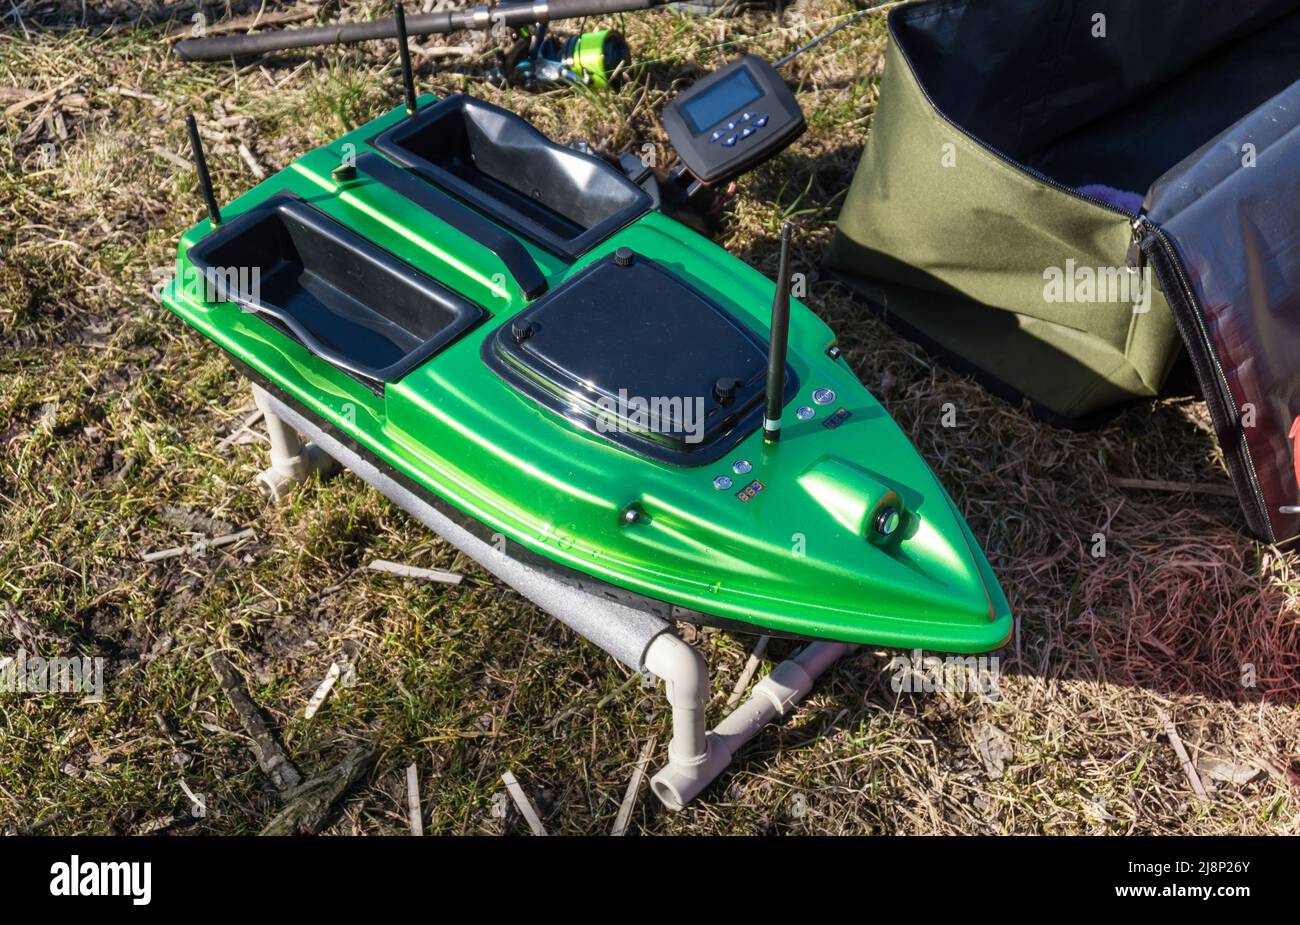 Bait Boat. A green fishing feeder with a wireless remote controller, fishfinder boat.  Stock Photo